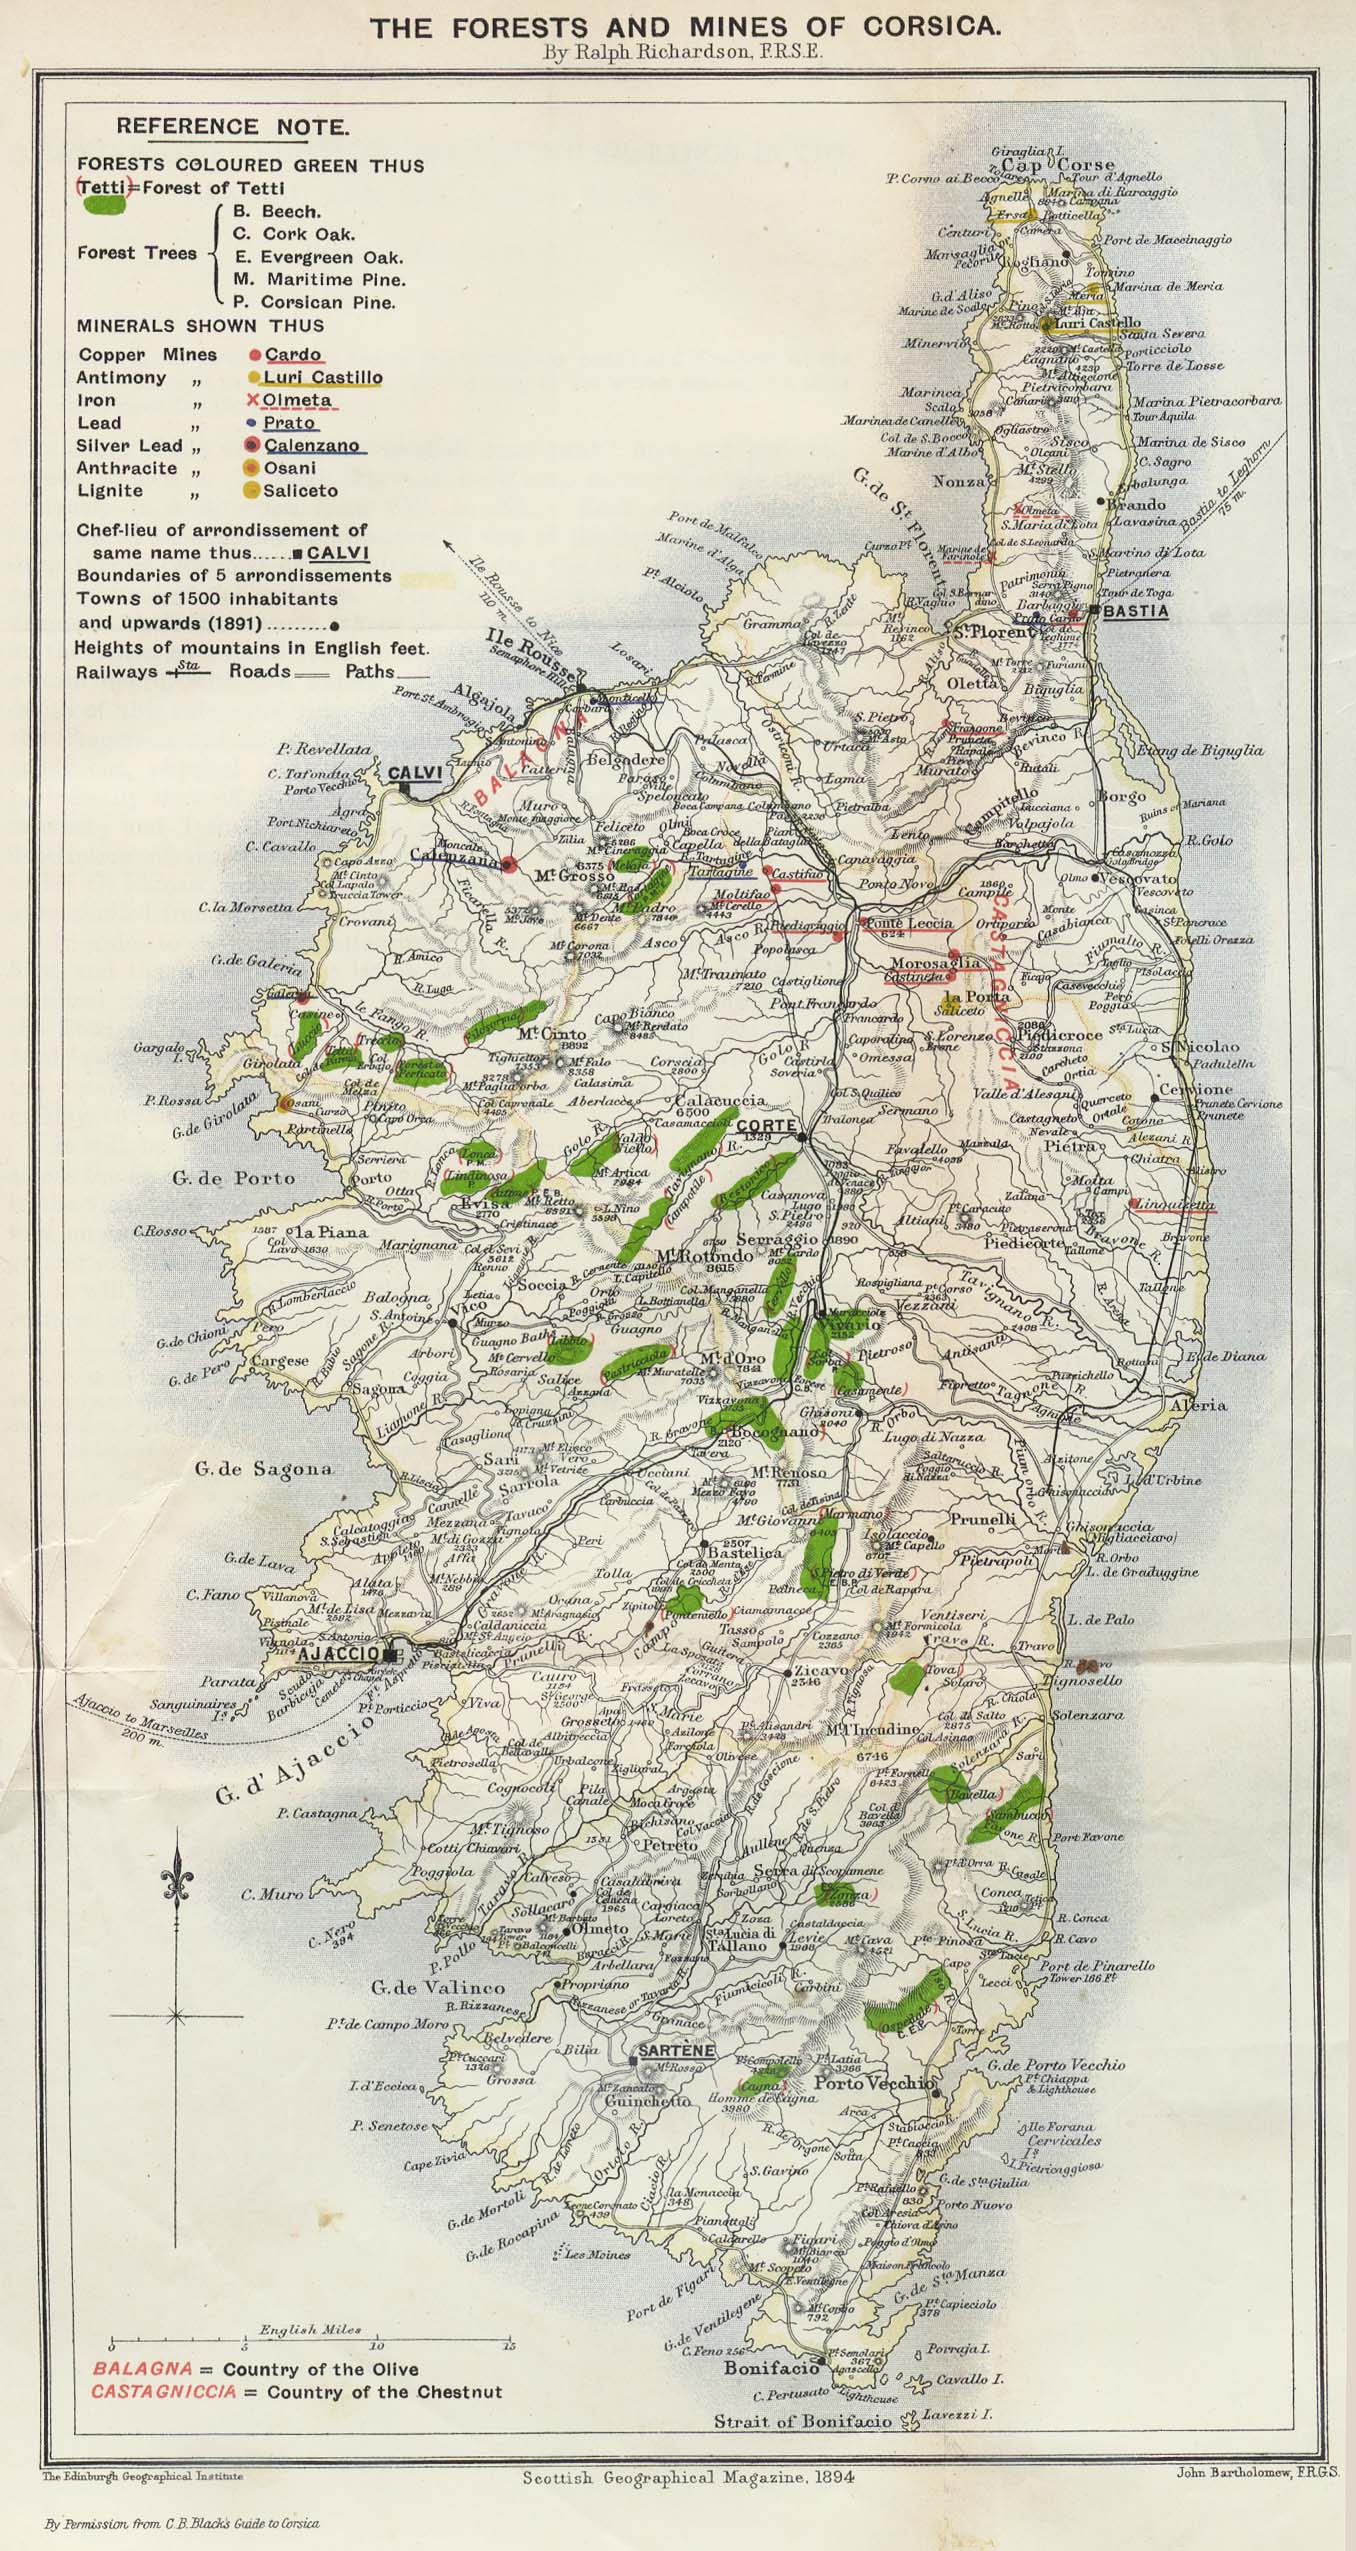 Historical Maps of Europe. Corsica 1894 (599K) "The Forests and Mines of Corsica" from the Scottish Geographical Magazine. Published by the Royal Scottish Geographical Society and edited by James Geikie and W.A. Taylor. Volume X, 1894. 